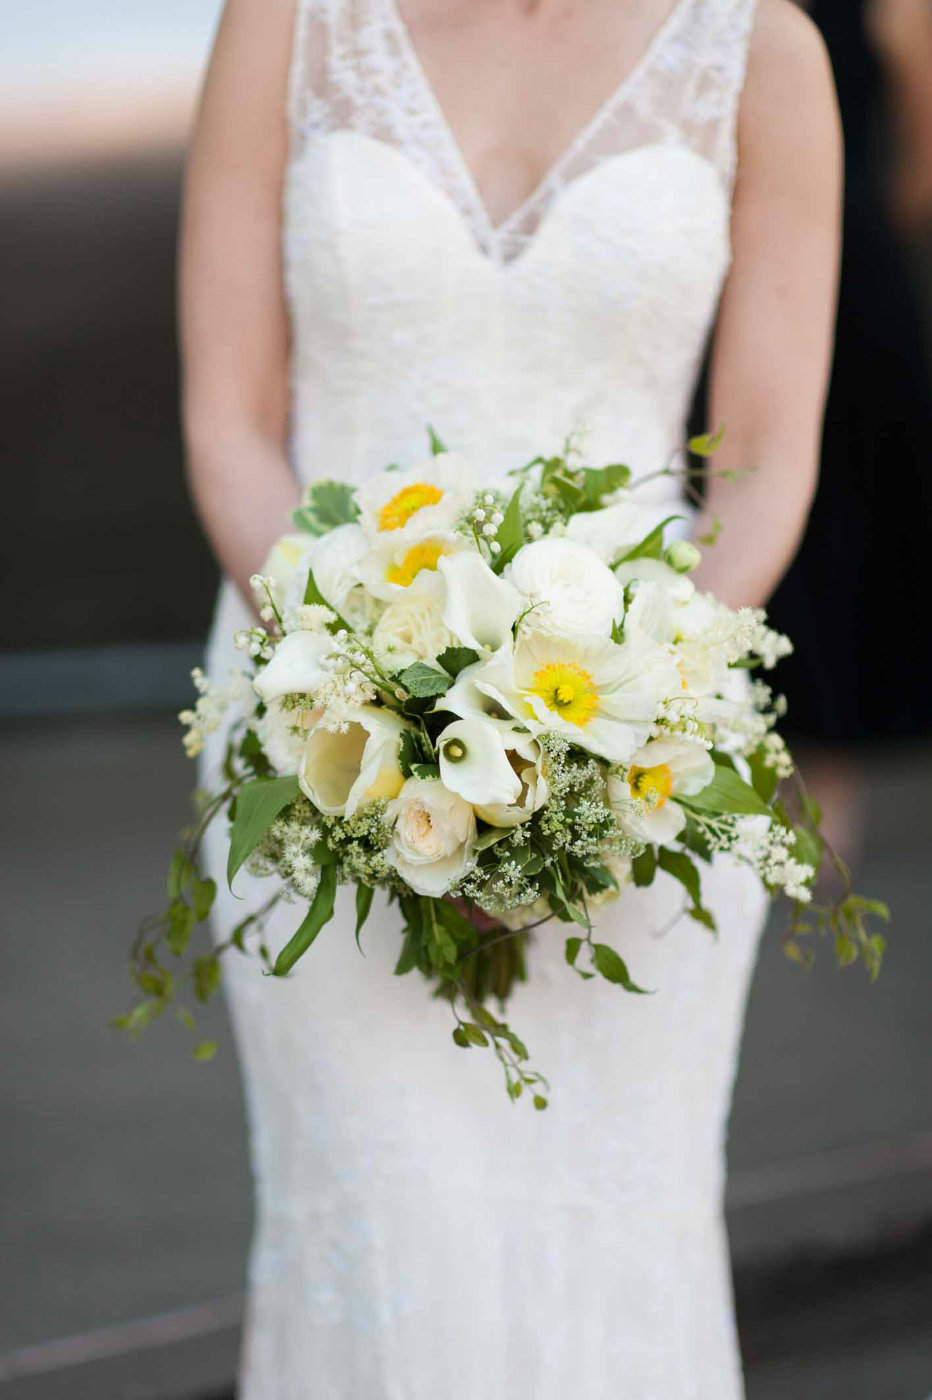 Elegant spring bridal bouquet in whites, yellows, and green featuring poppies and lily of the valley.